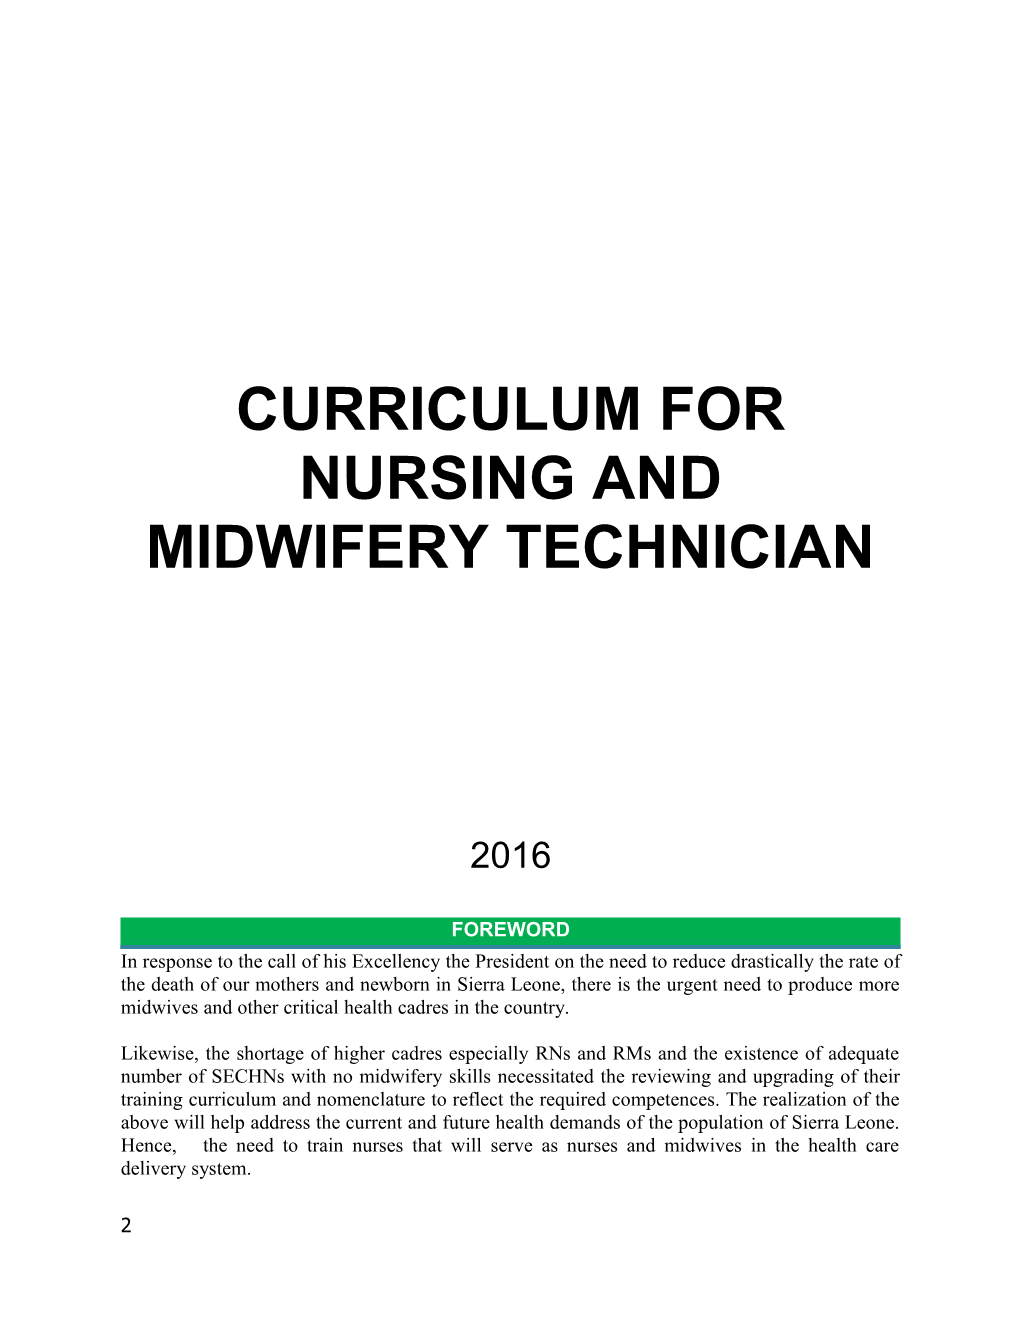 Curriculum for Nursing and Midwifery Technician